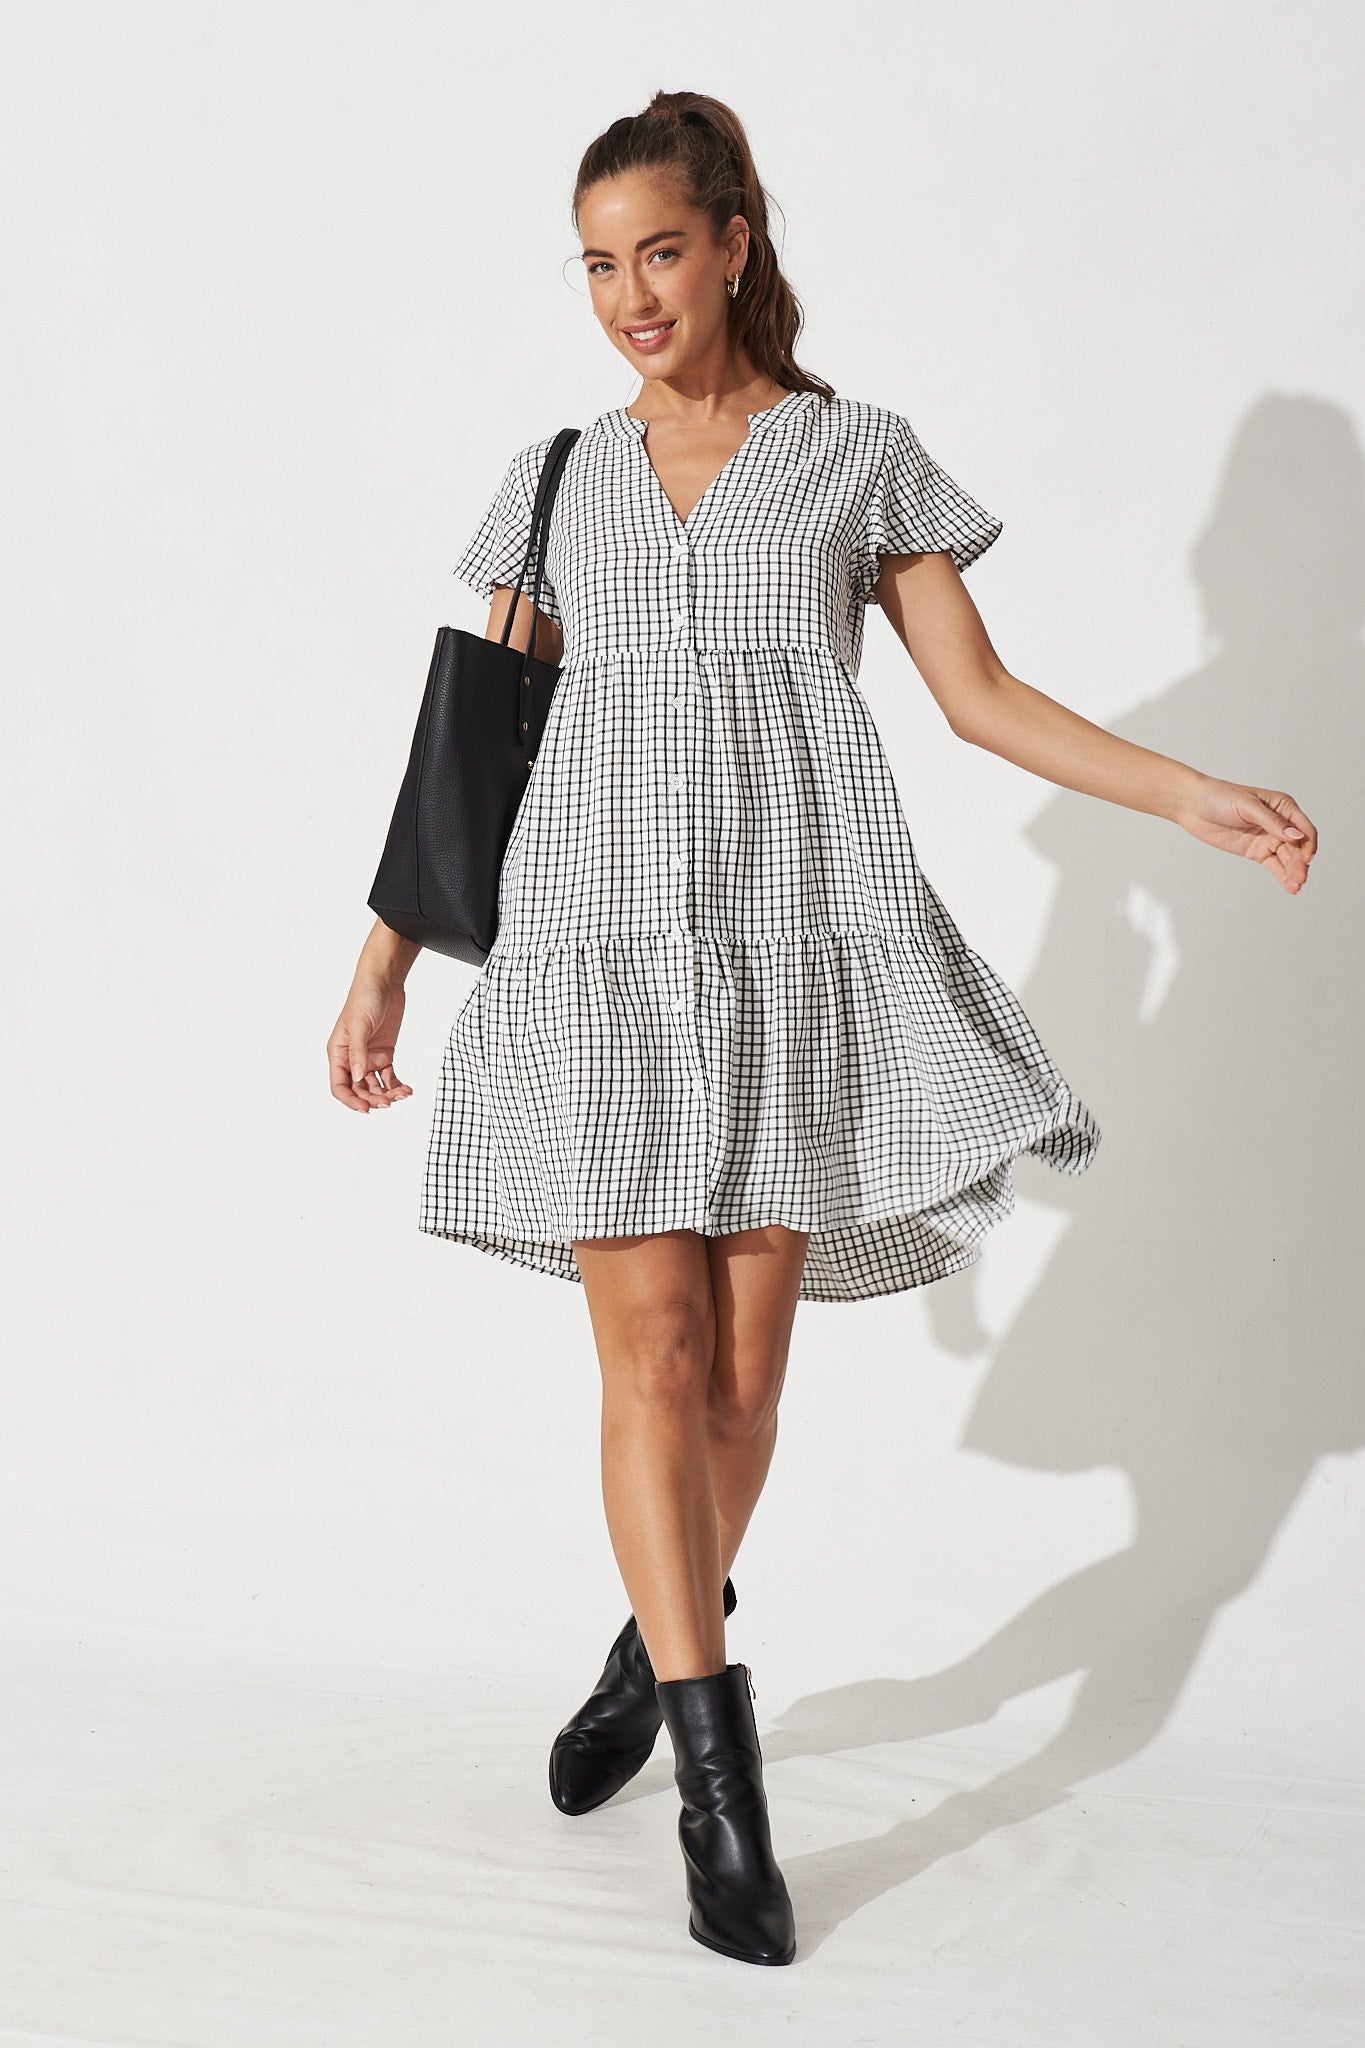 Shelby Shirt Dress in White with Black Check - Full Length